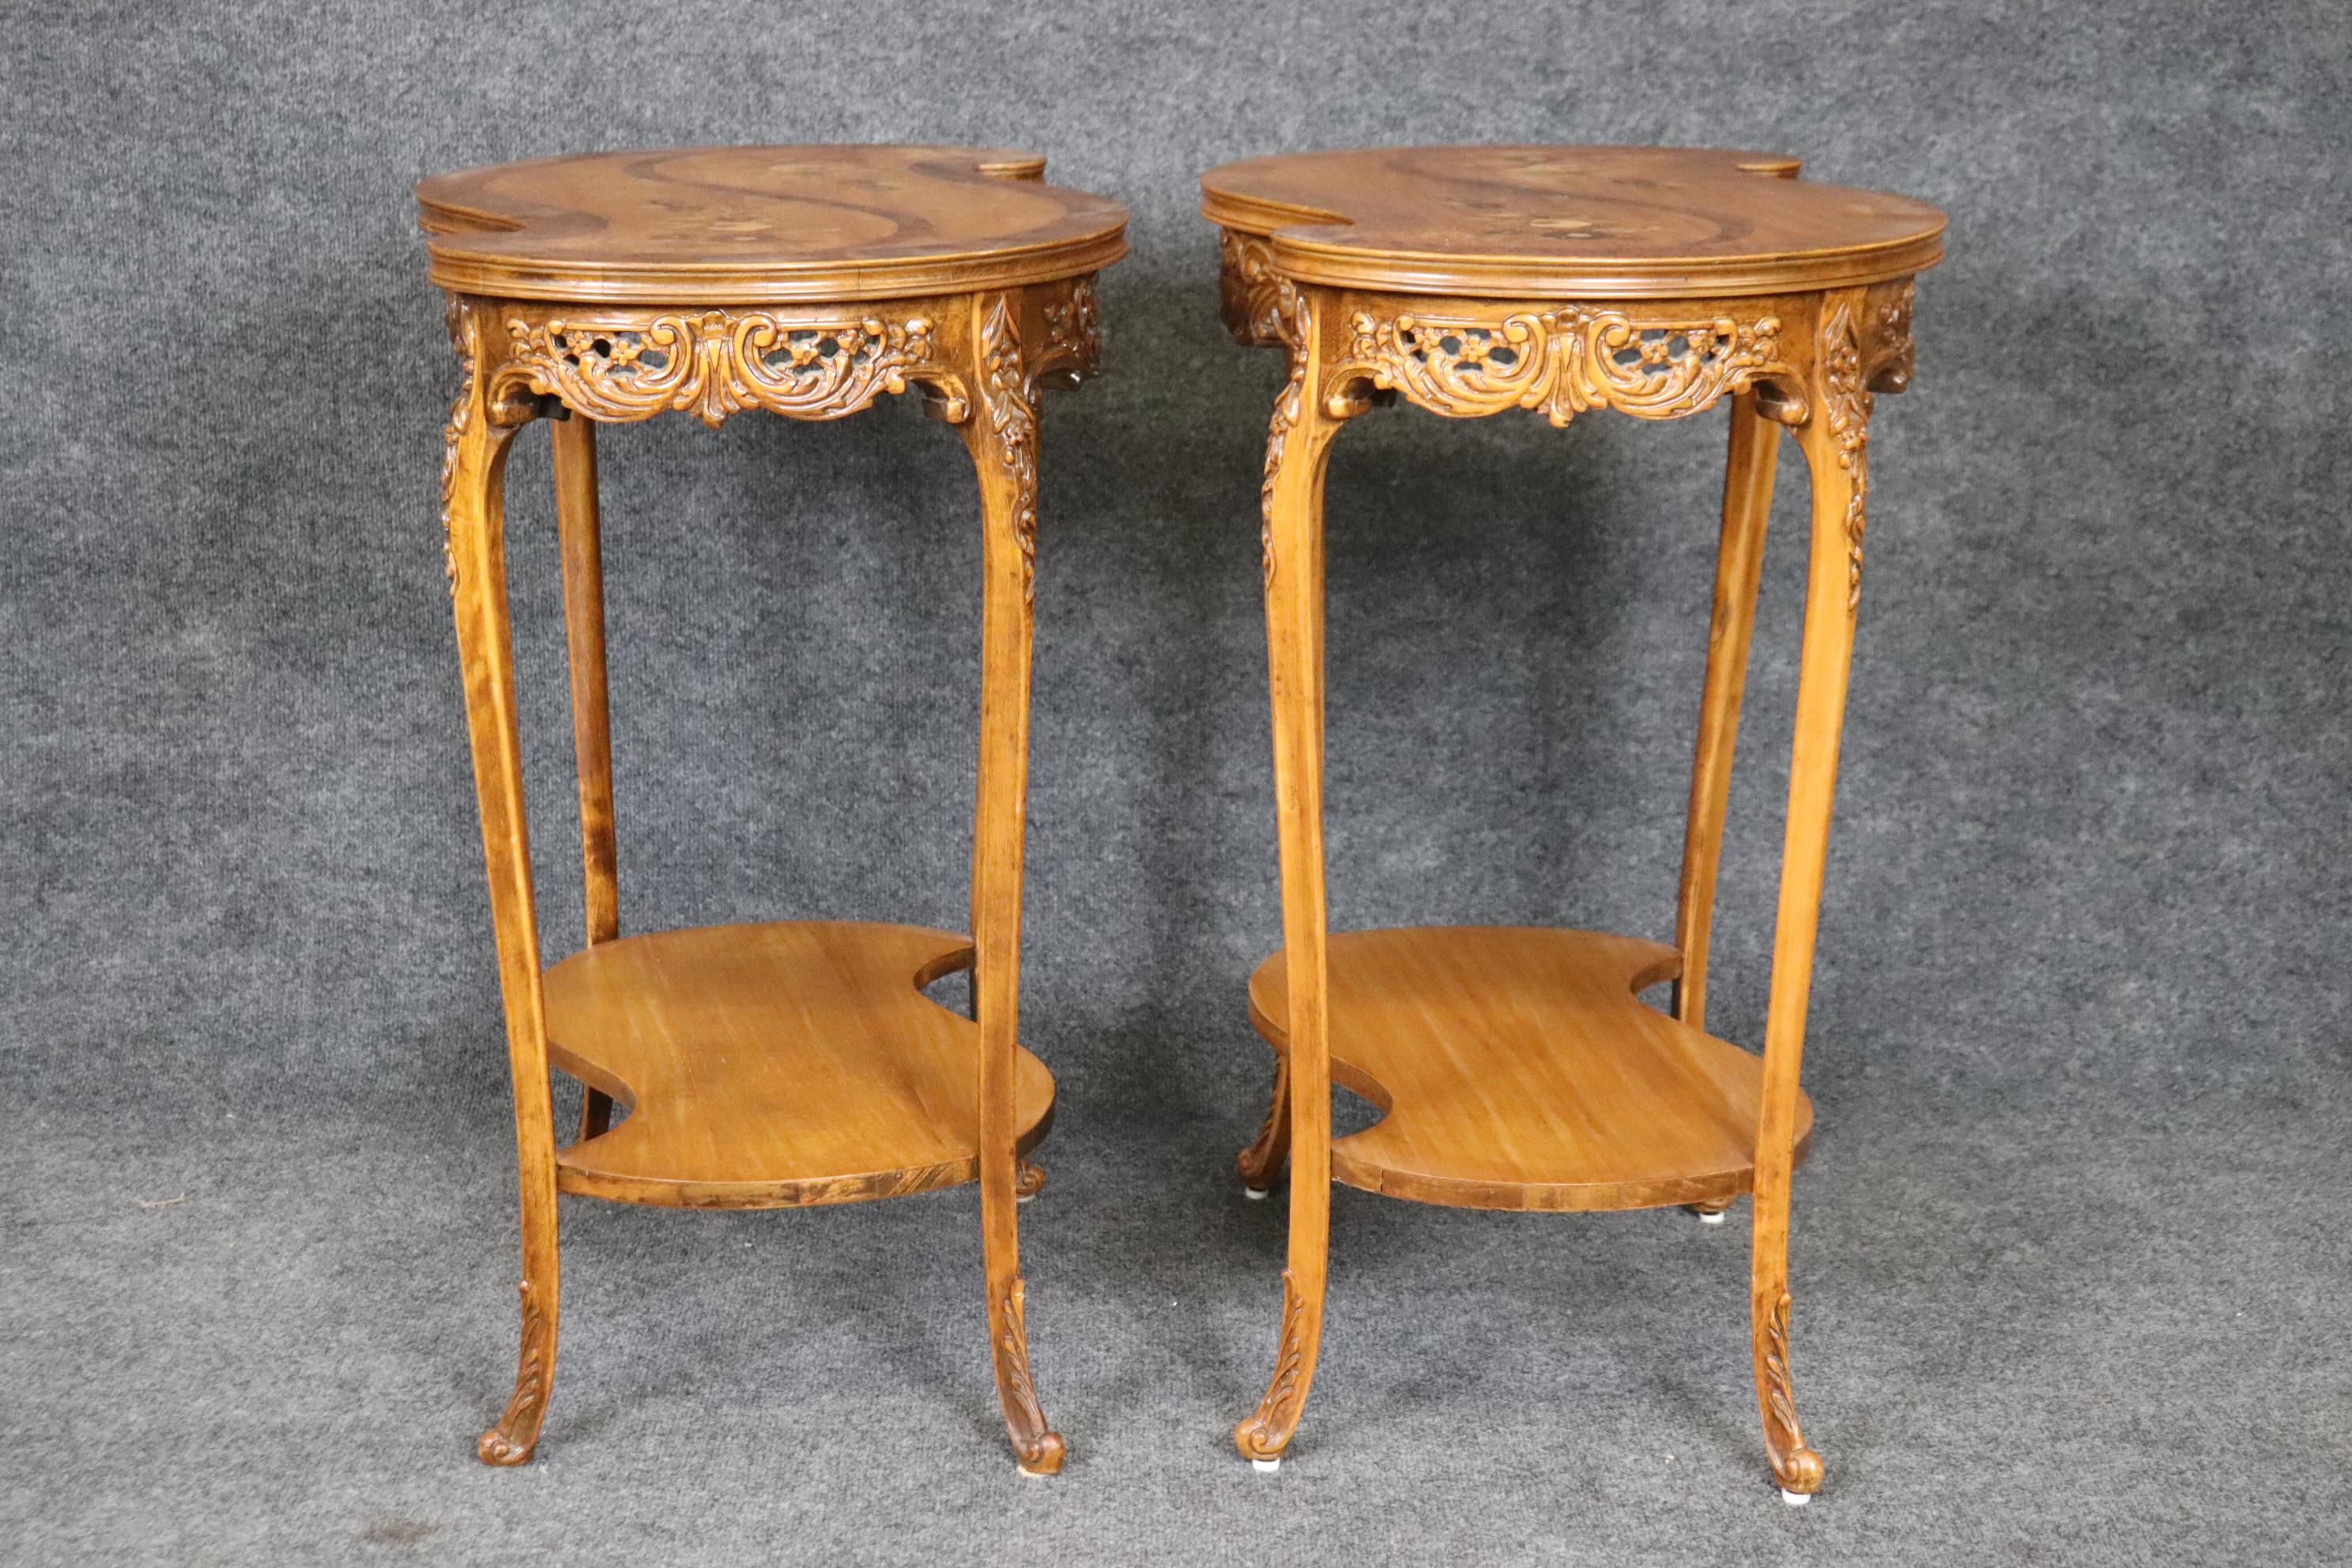 This is a gorgeous pair if French Louis XV style end tables in walnut with burled walnut and satinwood inlay. The tables are in good vintage condition. Measures 28.5 tall x 24 wide x 16 deep. dates to the 1950s and are American made. 